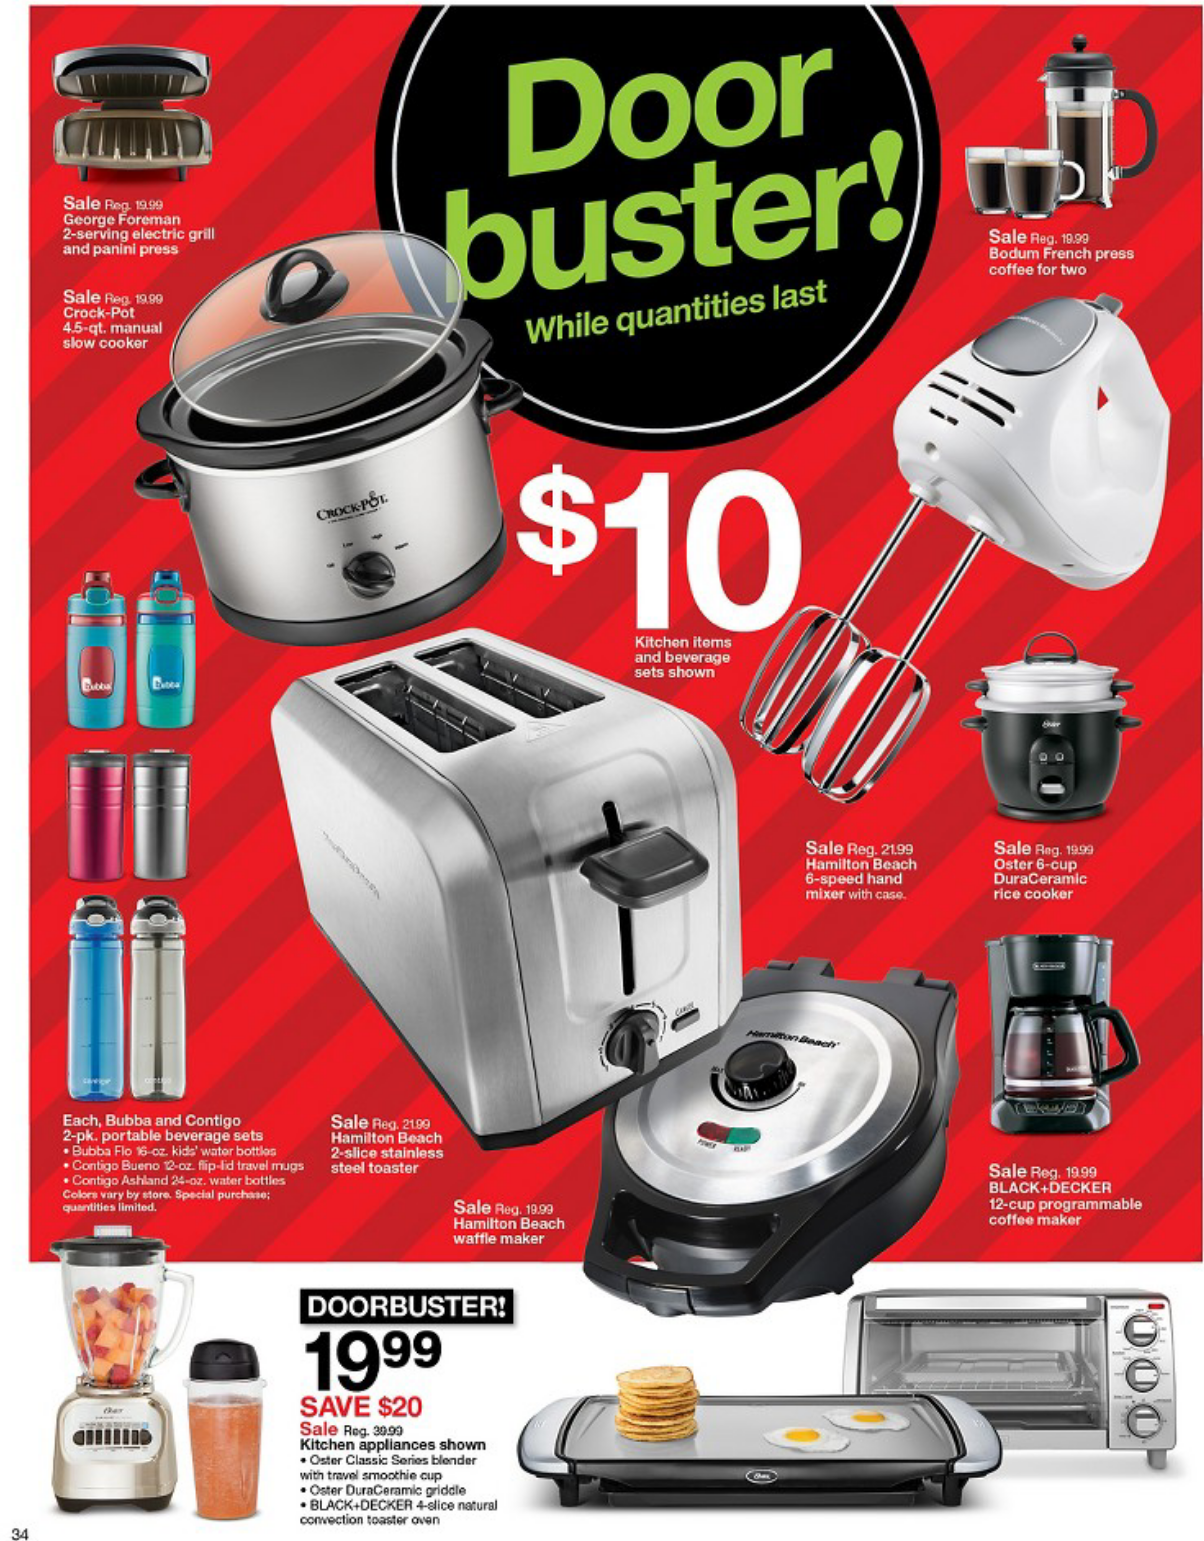 It’s Here! 2018 Target Black Friday Ad Preview - Page 12 of 12 - 0